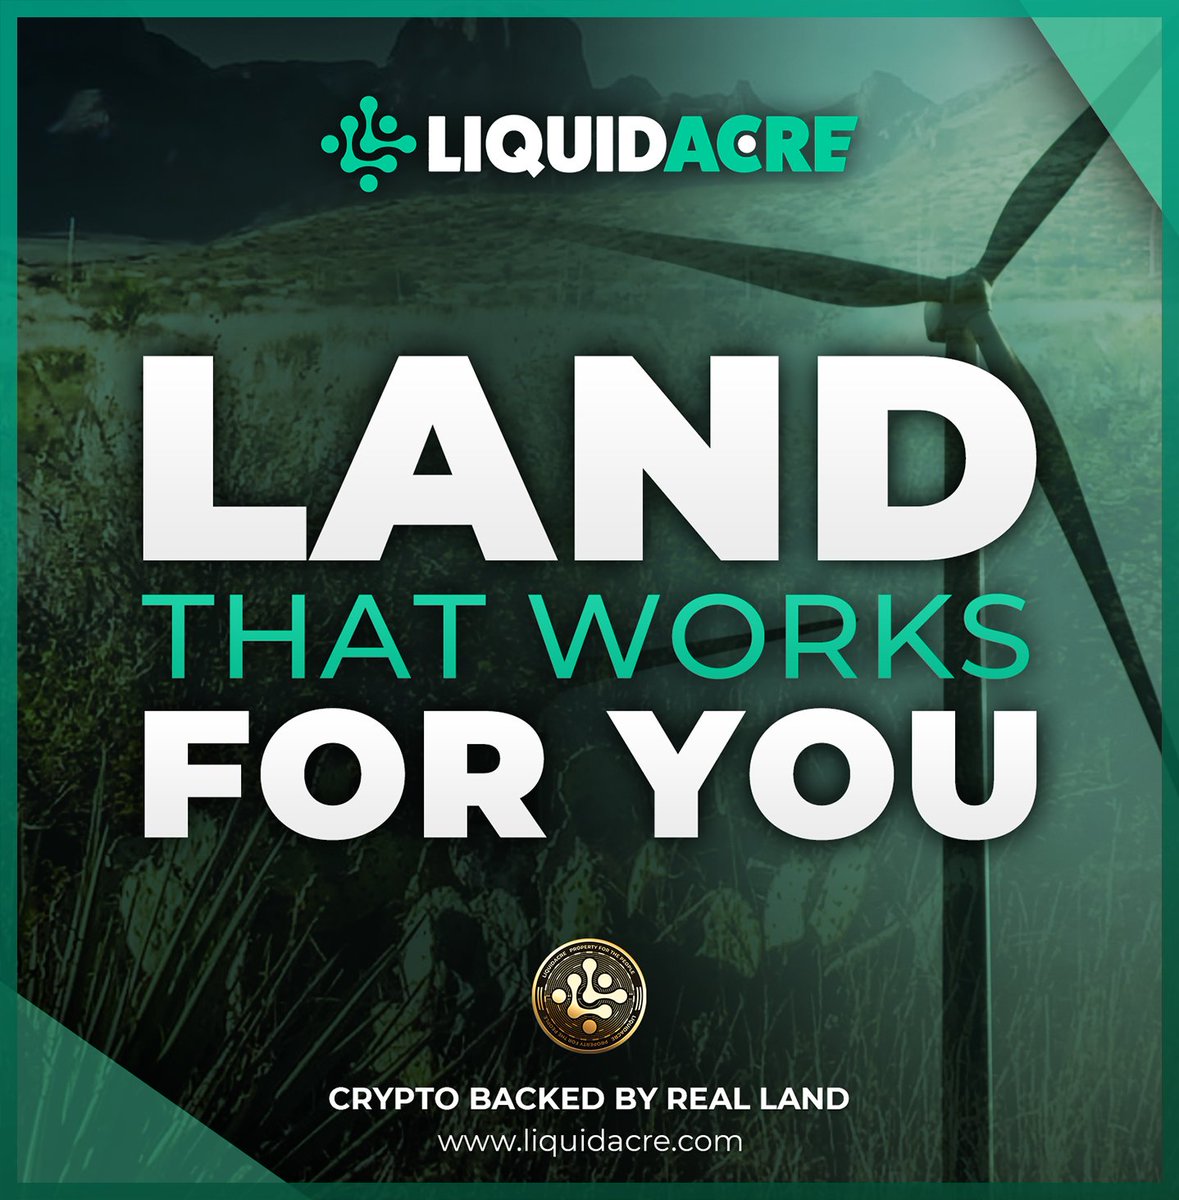 What can your land do for you? Or more importantly, how can it help others?!

With a #NFA,  the possibilities are endless. 

#NonfungibleAcre #PolygonSupported #Wind #Solar #Hemp #EcoFarming #WaterWells #Water

liquidacre.com